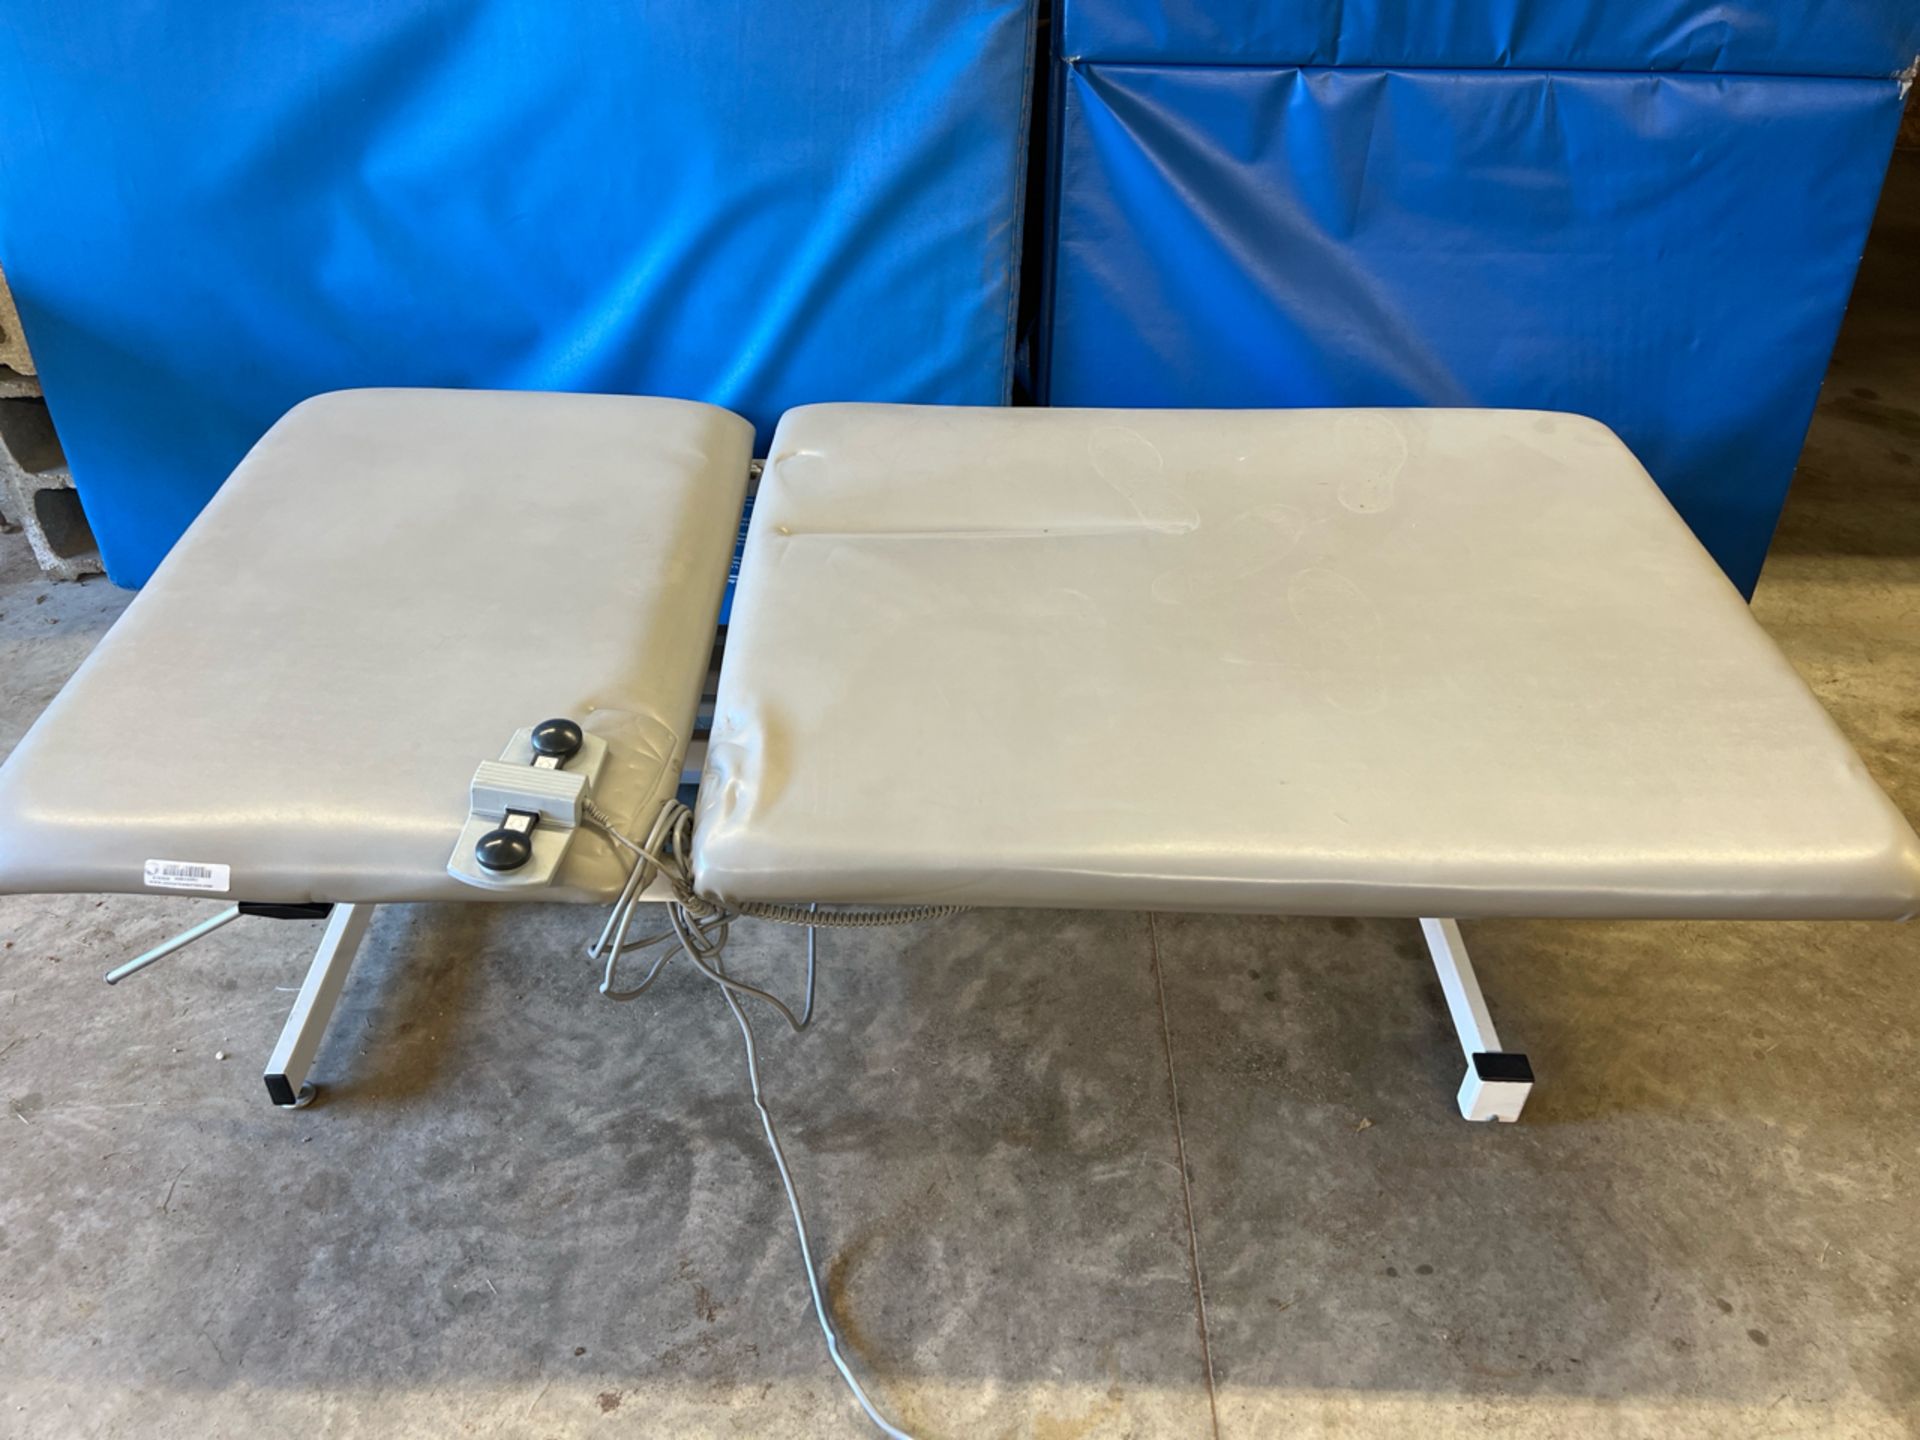 PERFORMA 553733 POWER THERAPY TABLE WITH FOOT CONTROL